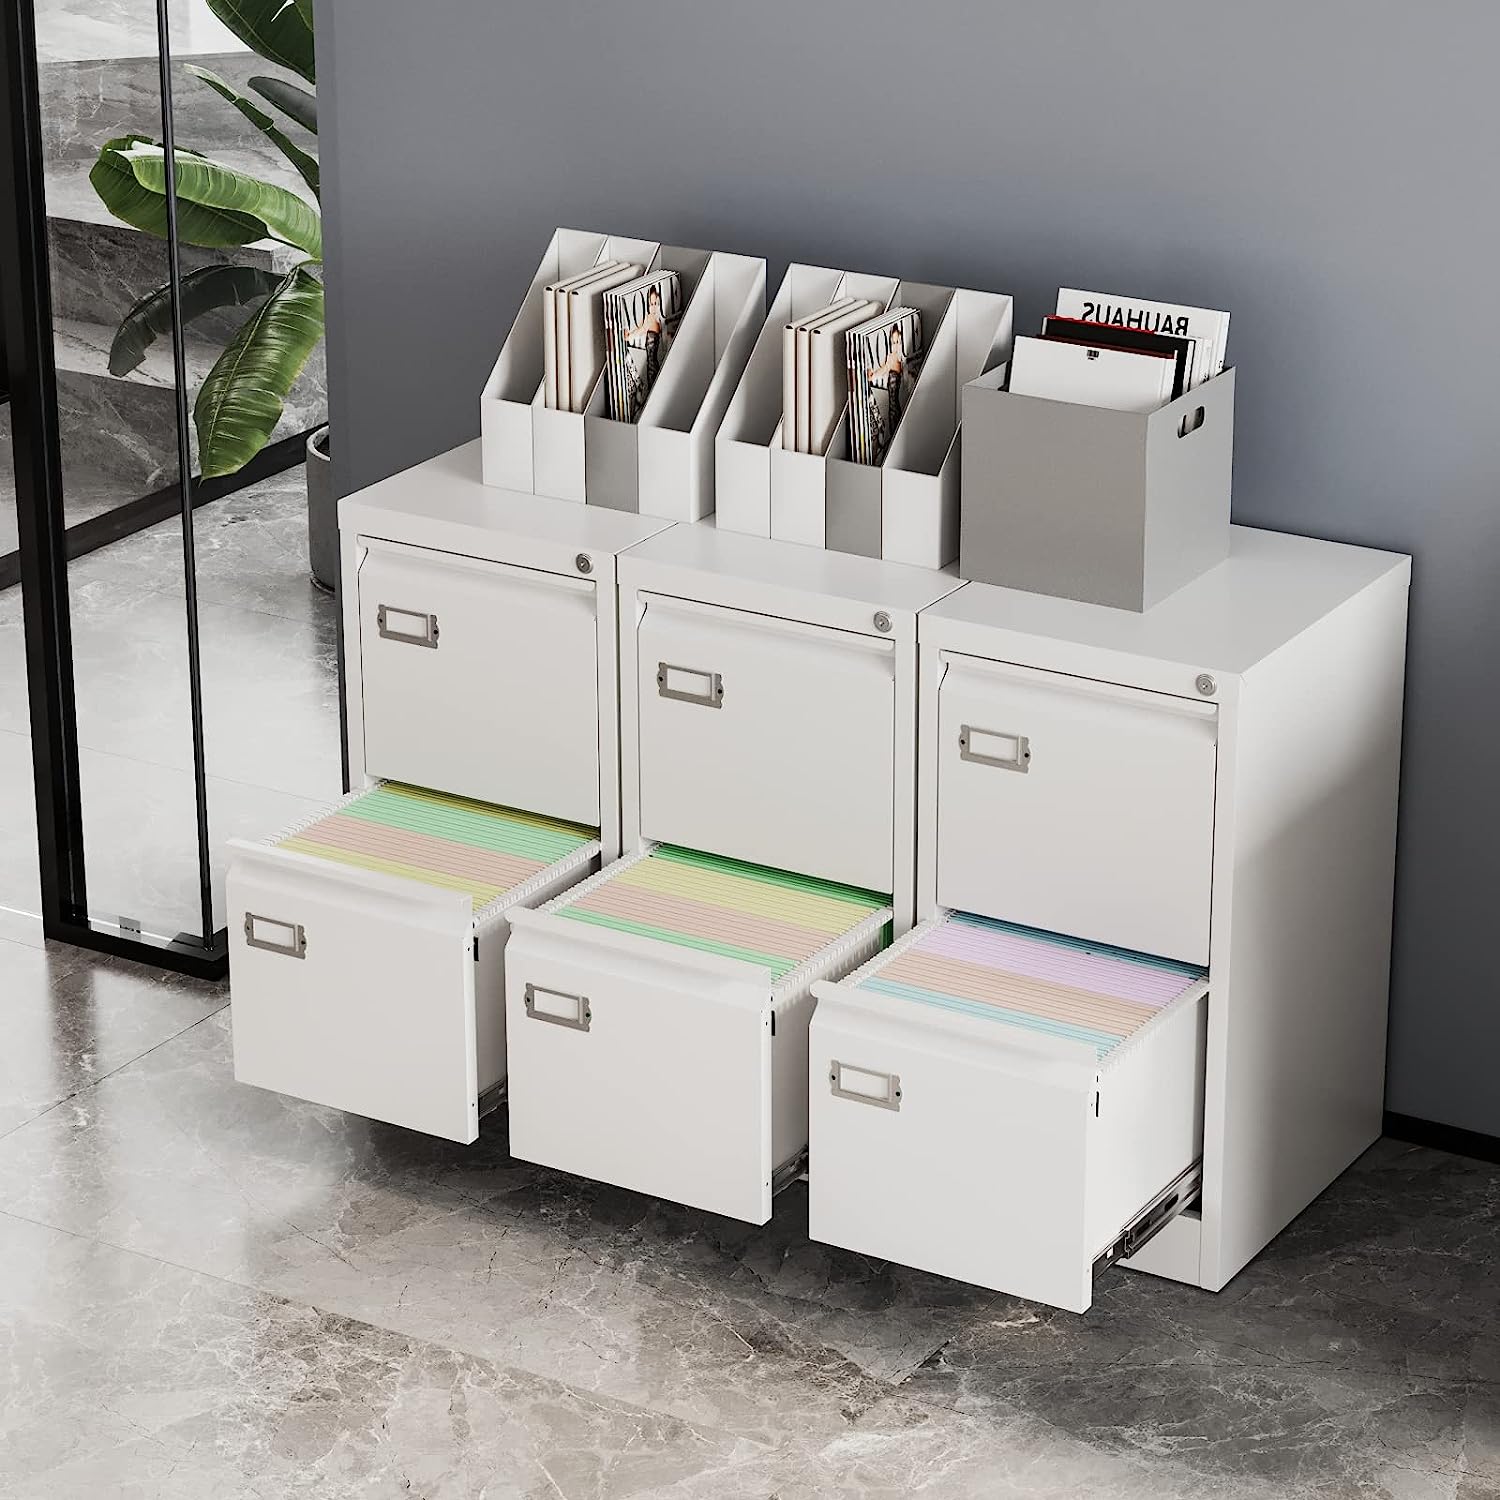 How To Remove Drawers From Filing Cabinet